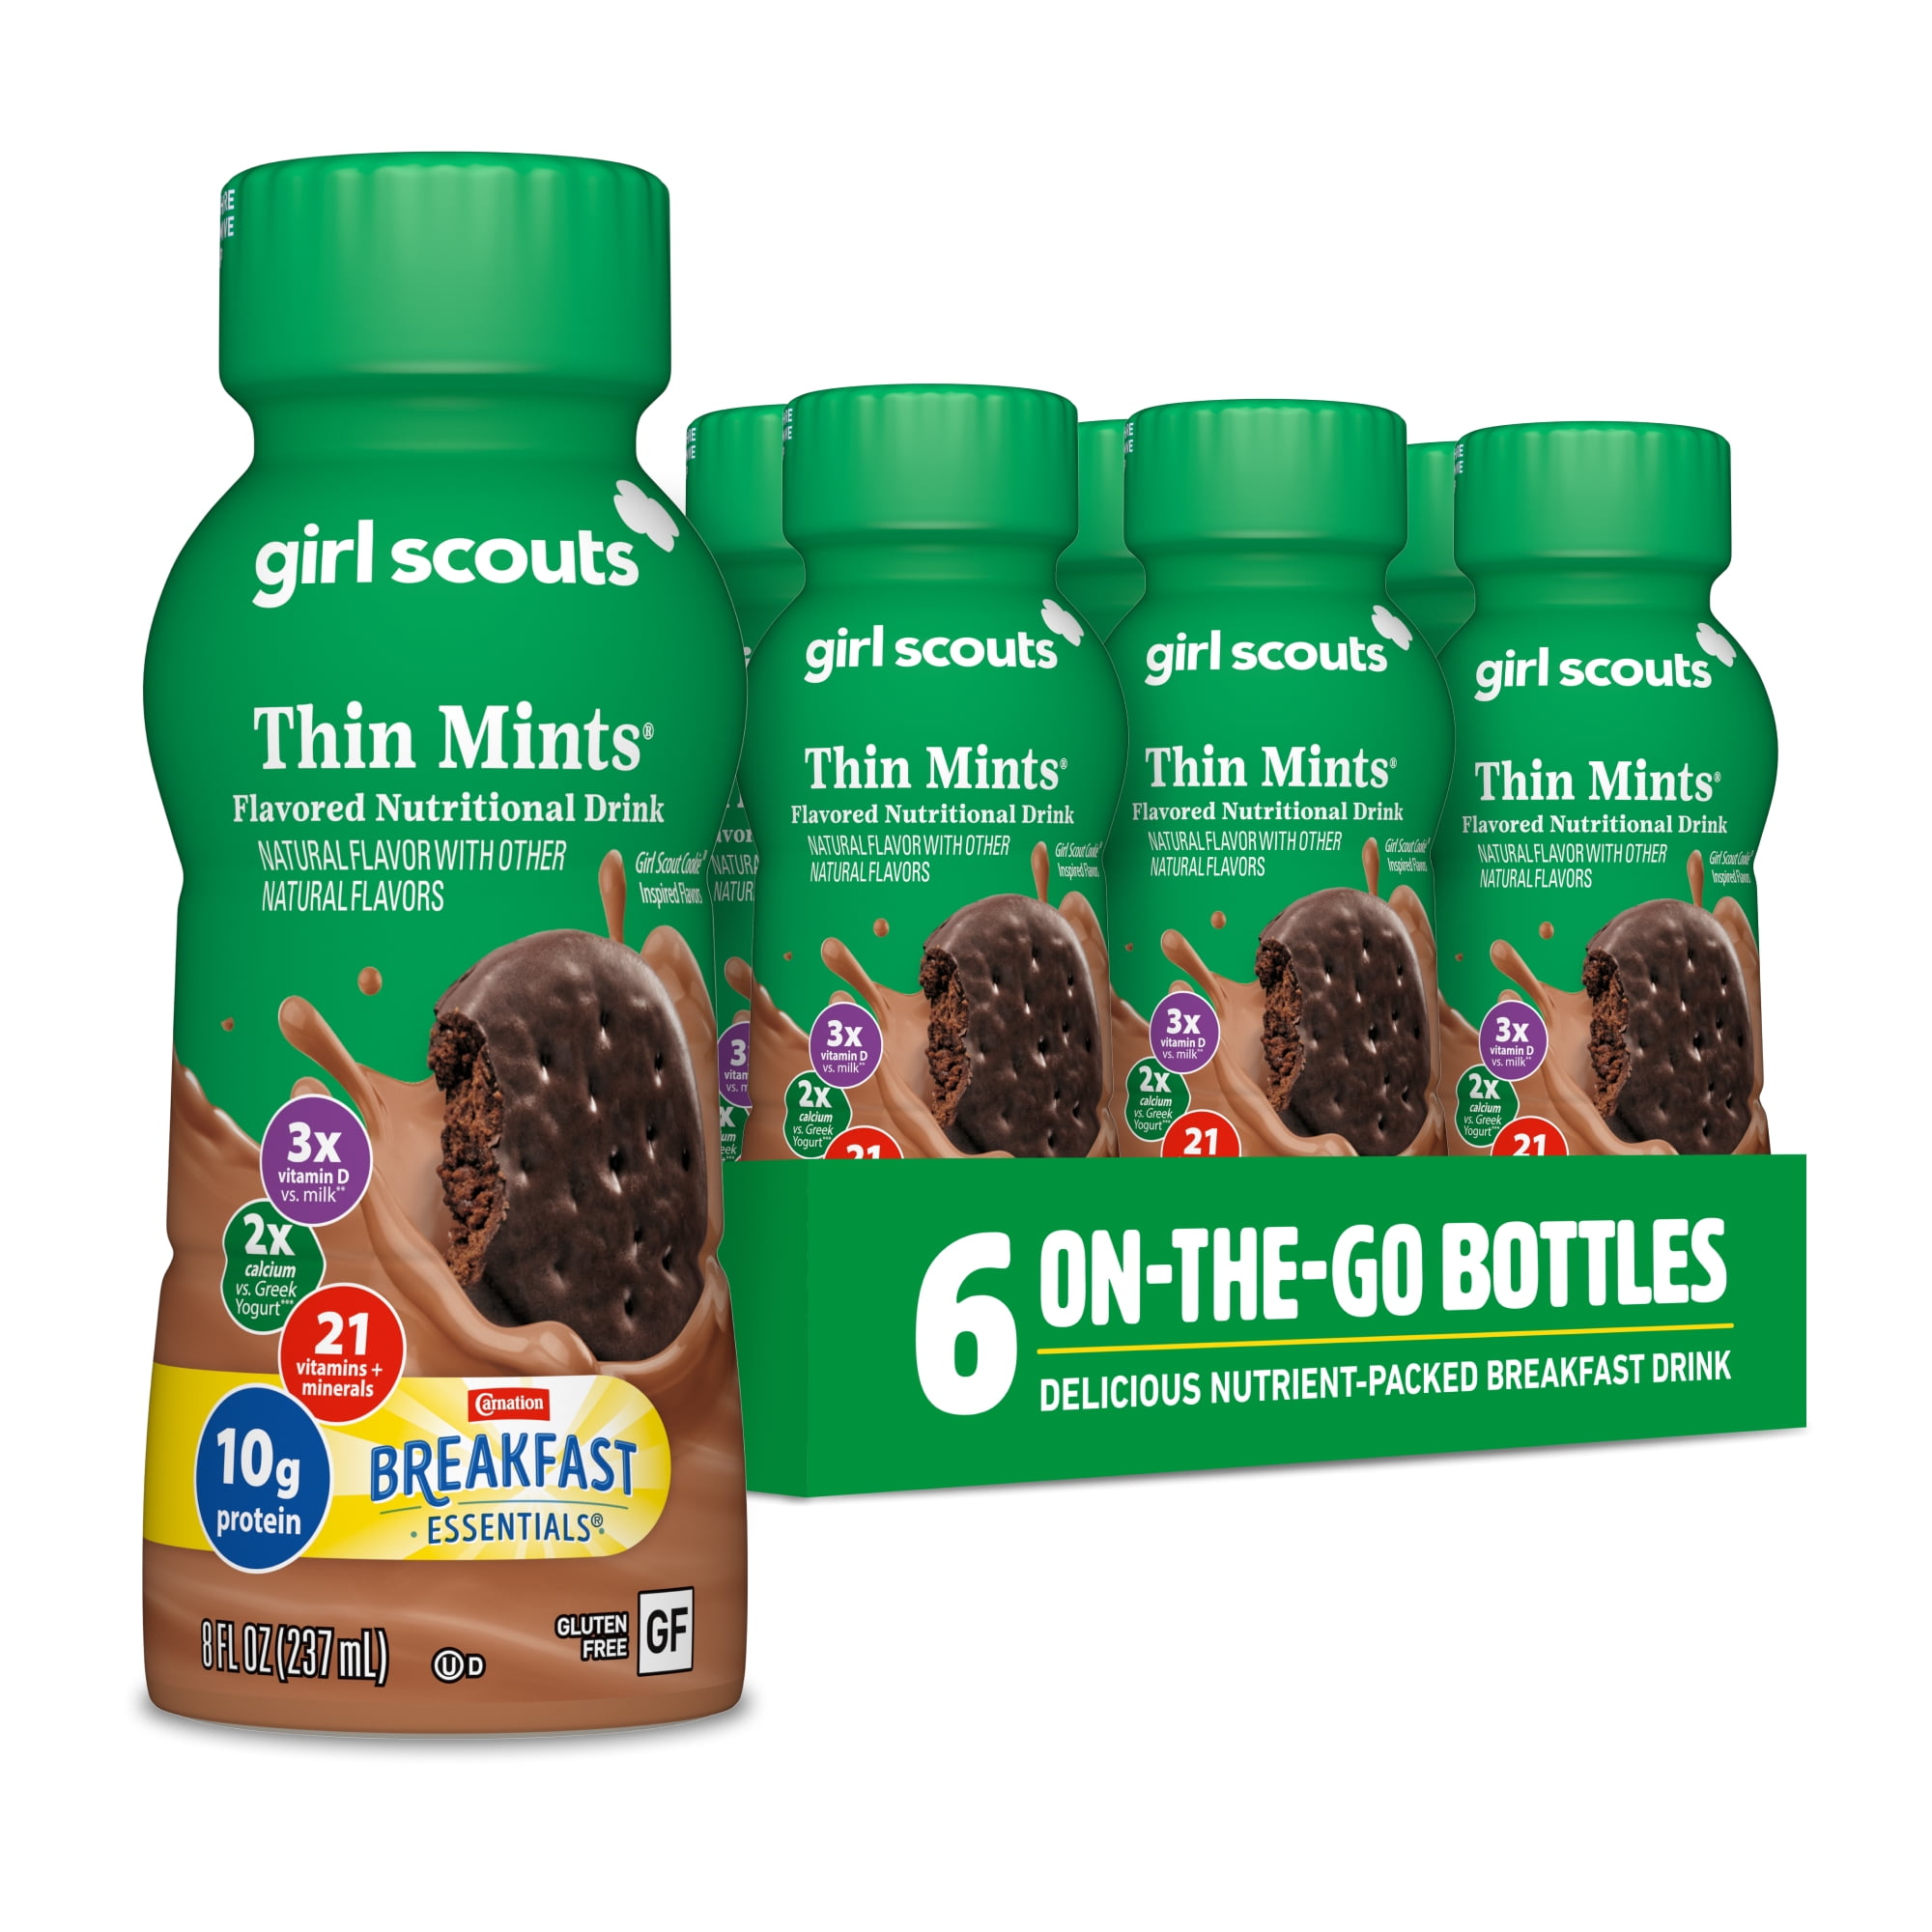 Carnation Breakfast Essentials® Girl Scouts Thin Mints® Flavored